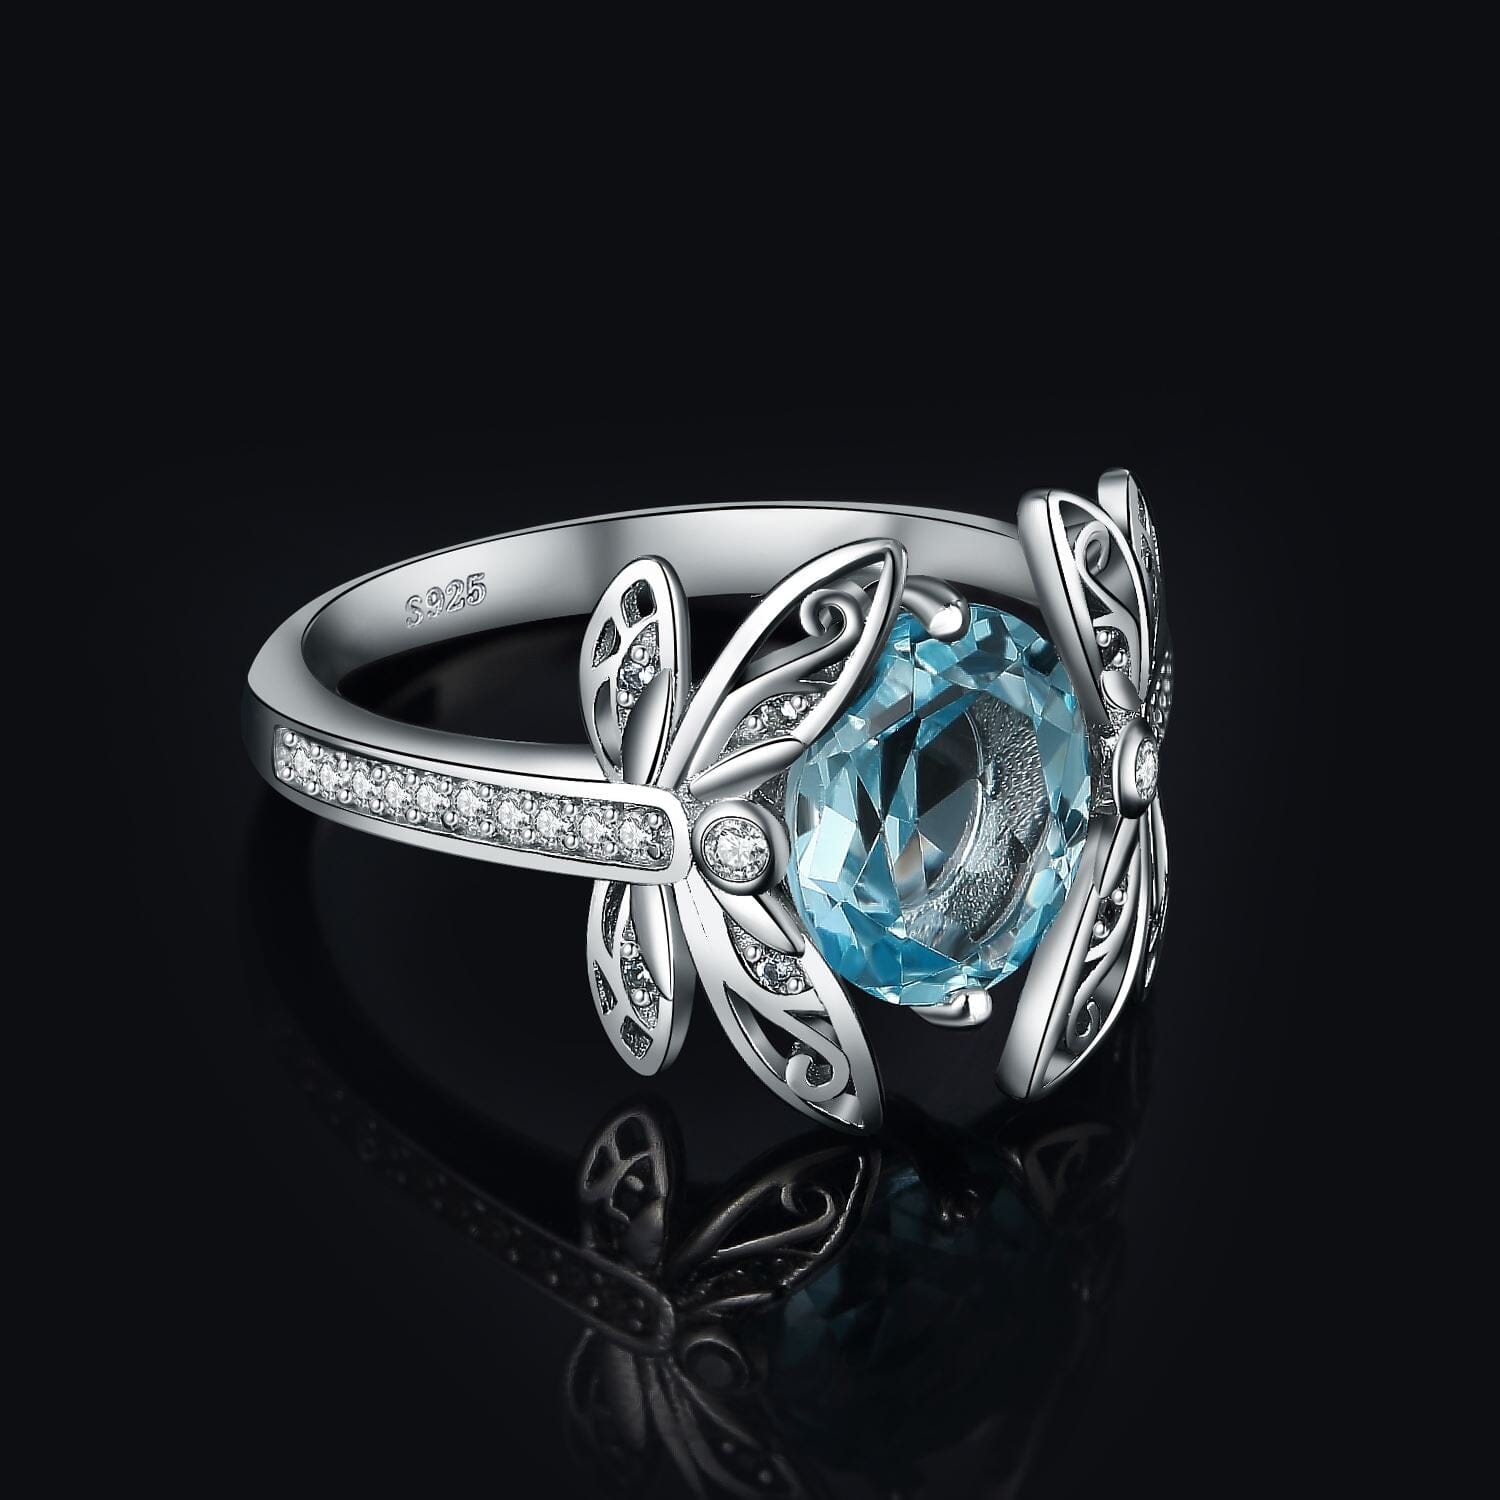 Dragonfly 3.6ct Natural Blue Topaz Cocktail Ring - 925 Sterling SilverRing